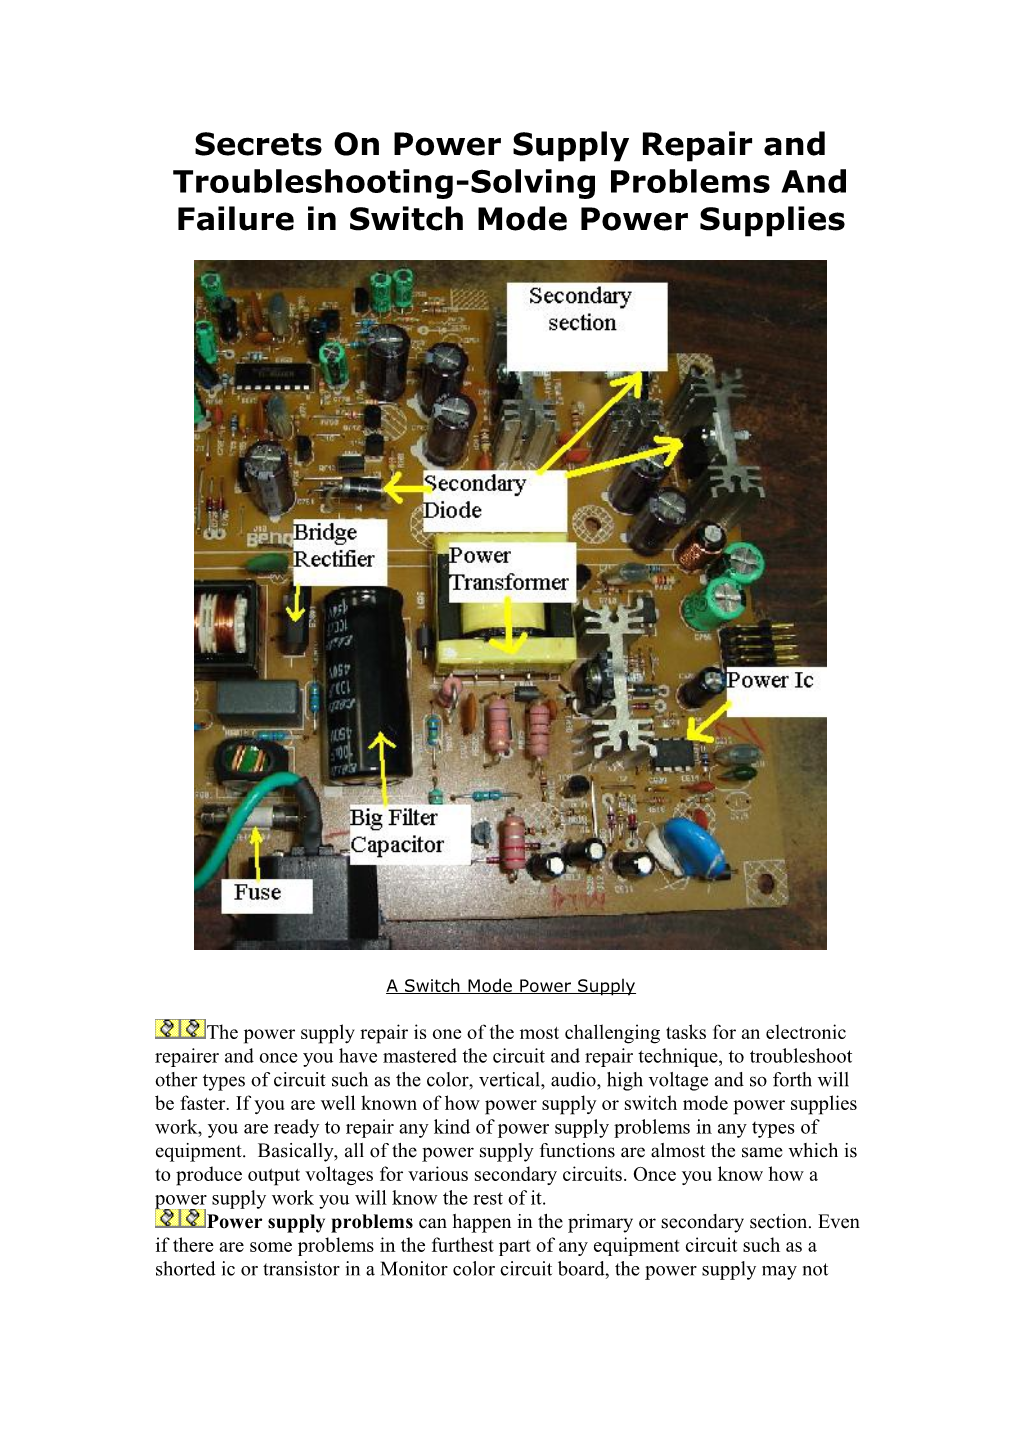 Secrets on Power Supply Repair and Troubleshooting-Solving Problems and Failure in Switch